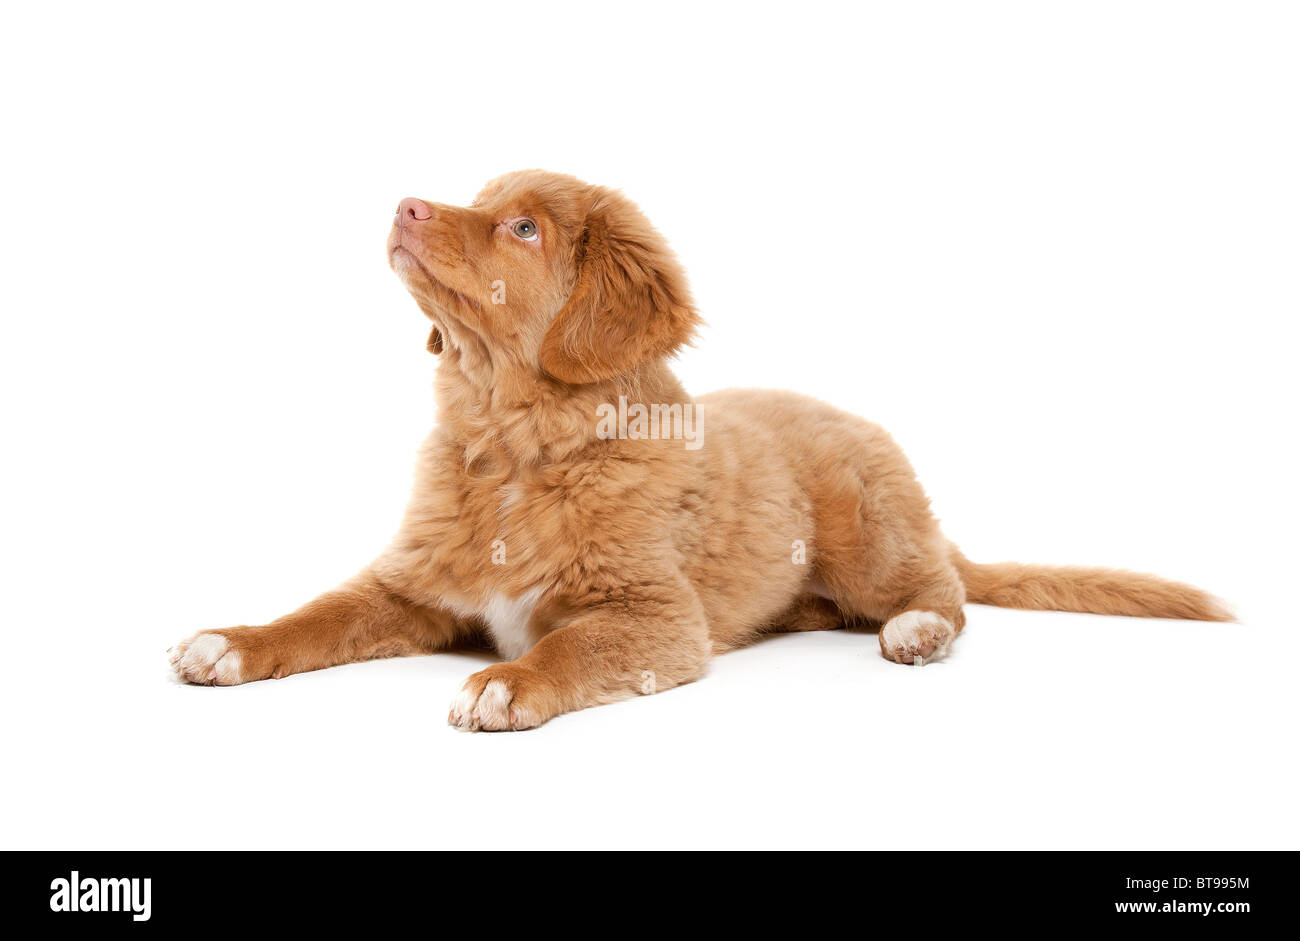 a young puppy of the Nova Scotia Duck Tolling Retriever breed Stock Photo